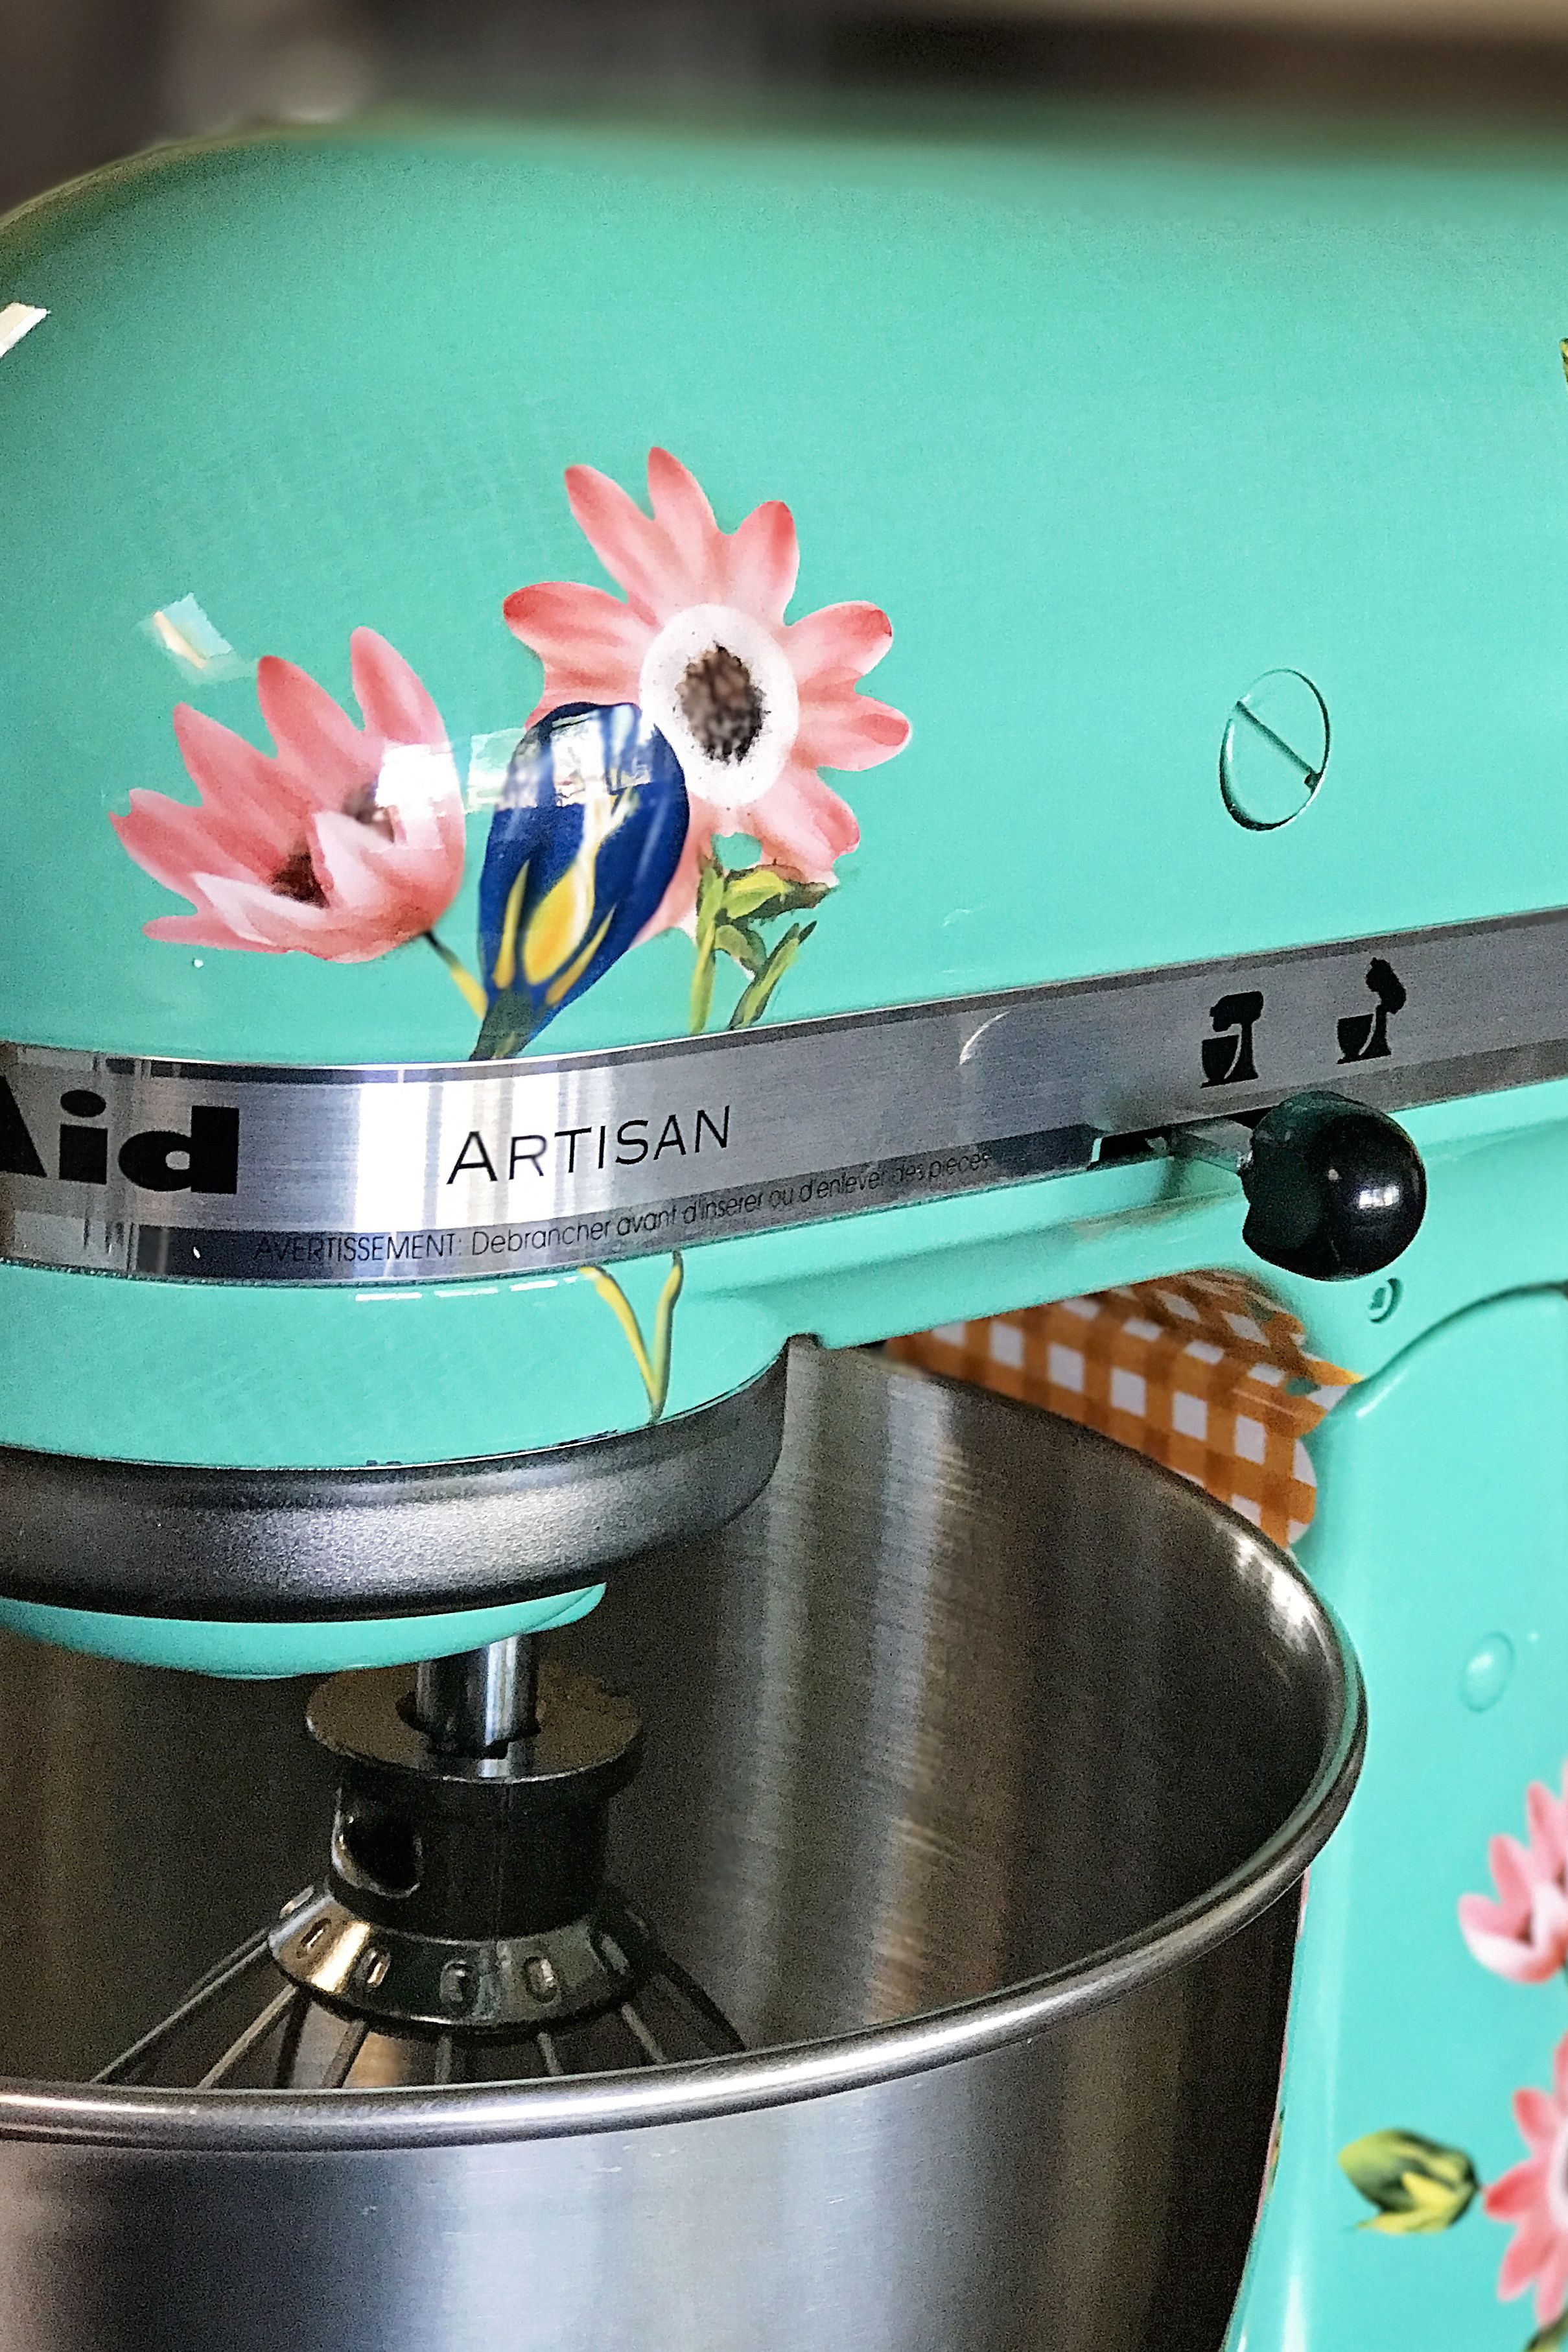 ReNew Family Consignment - 💥WOW💥 This KitchenAid Artisan Stand Mixer (in  pistachio) has been used less than 10 times and is a huge discount off the  retail price. Find it online here